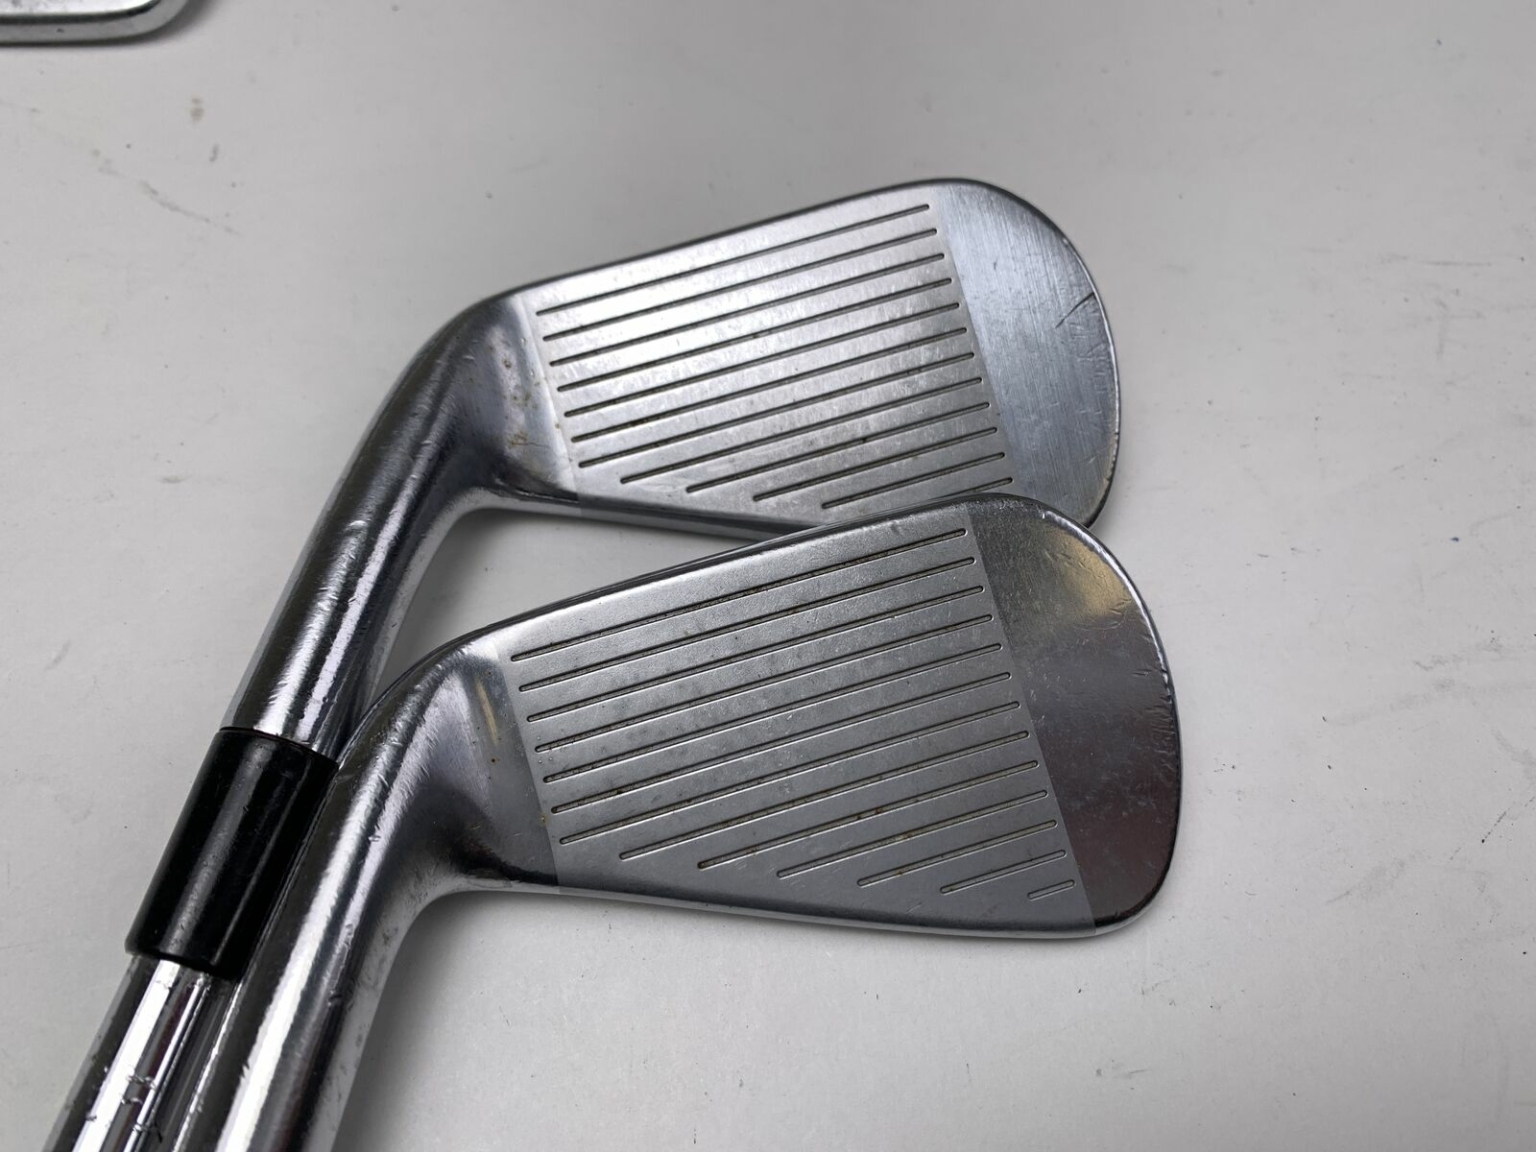 Taylormade P770 Vs Taylormade P760 Irons Comparison Overview - The ...